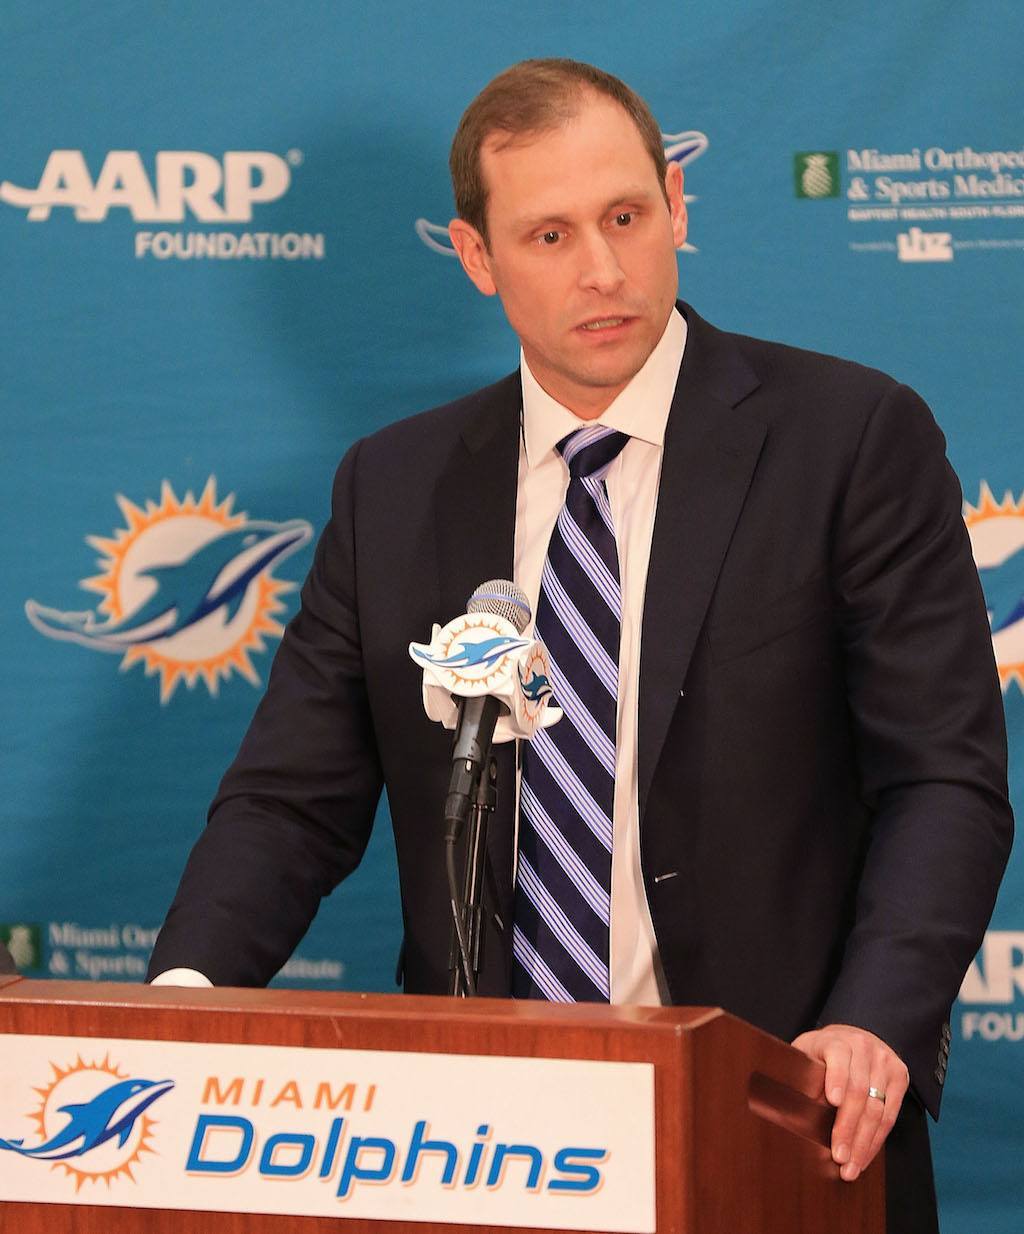 DAVIE, FL - JANUARY 09: The Miami Dolphins announce Adam Gase as their new head coach at Sunlife Stadium on January 9, 2016 in Davie, Florida. (Photo by Mike Ehrmann/Getty Images)